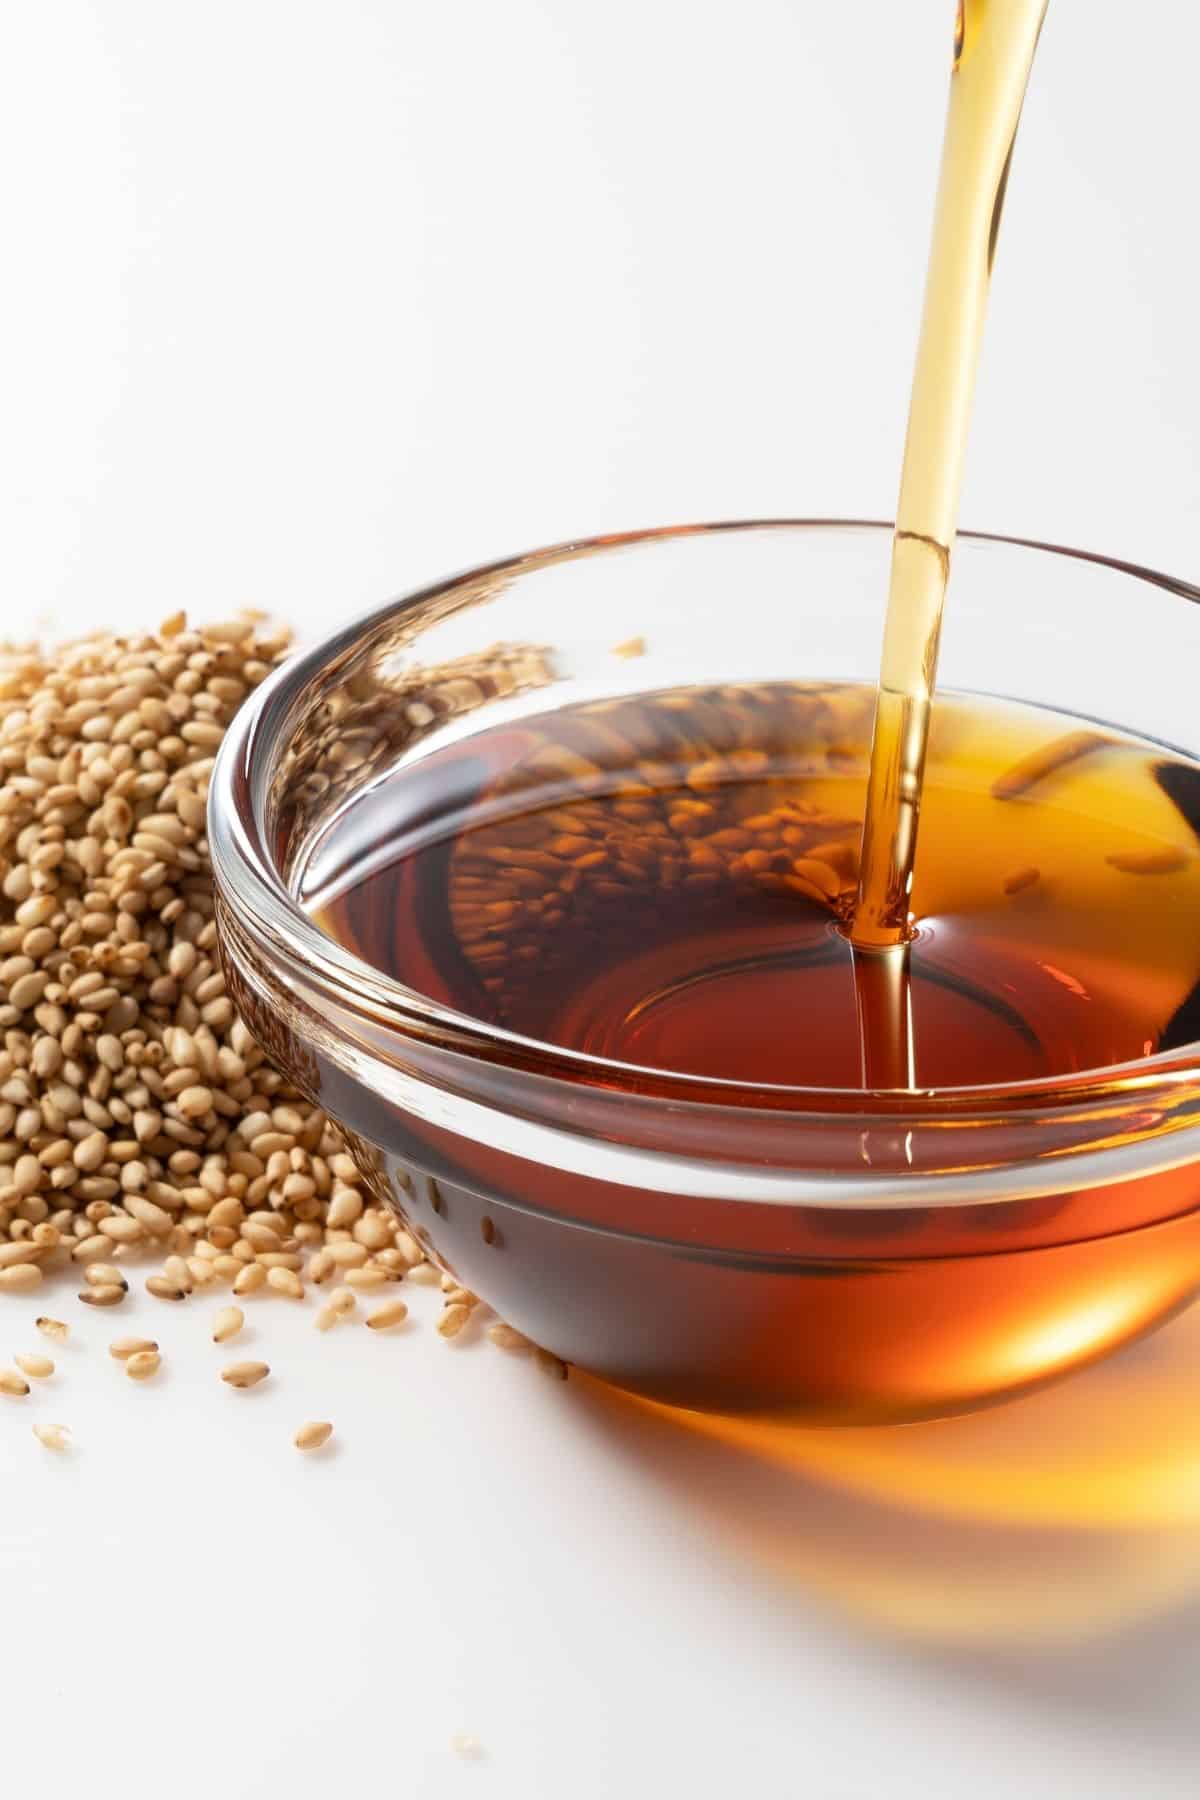 Small bowl of sesame oil next to sesame seeds on a counter.